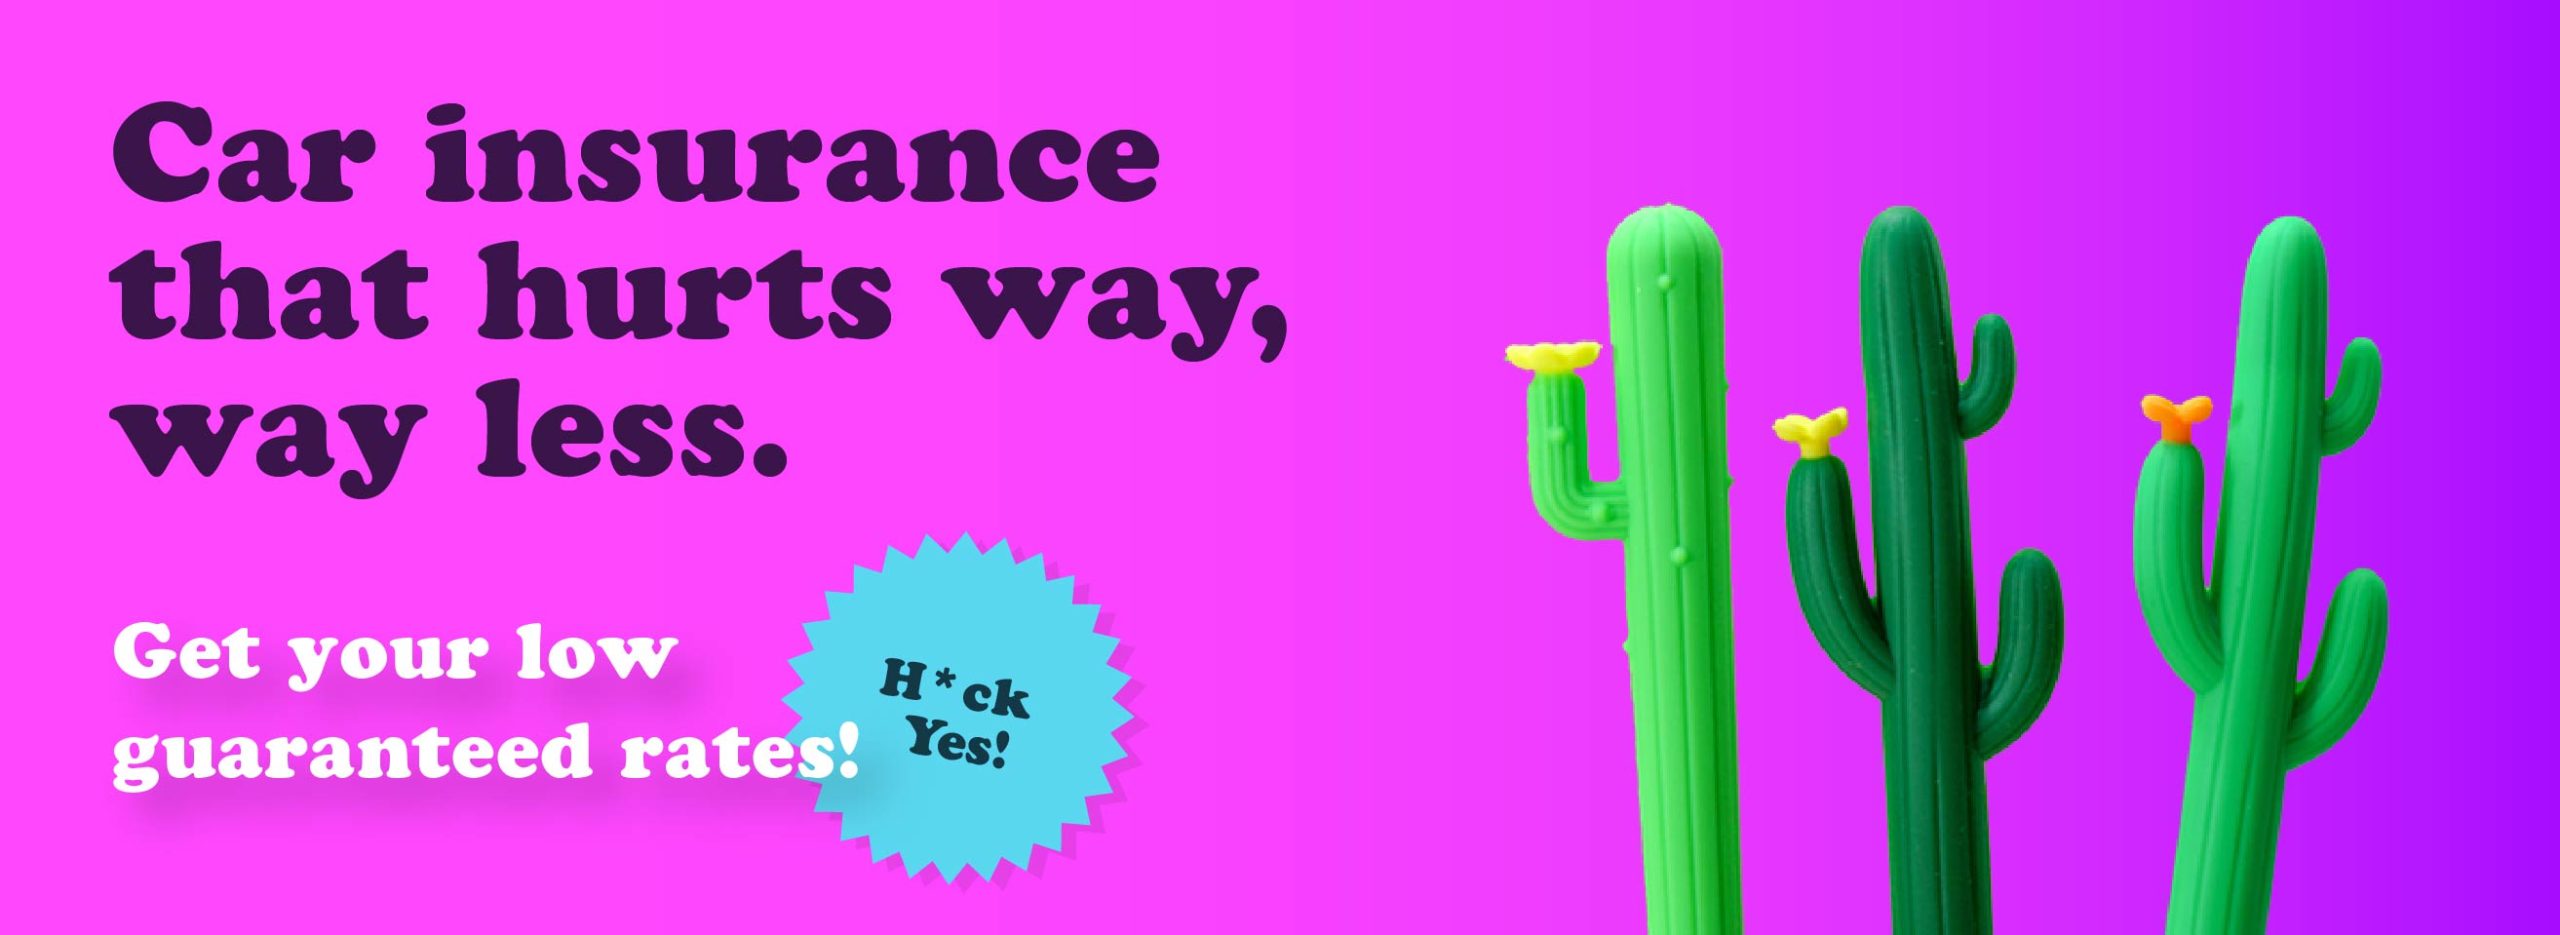 "Car insurance that hurts way, way less" beside toy cacti.